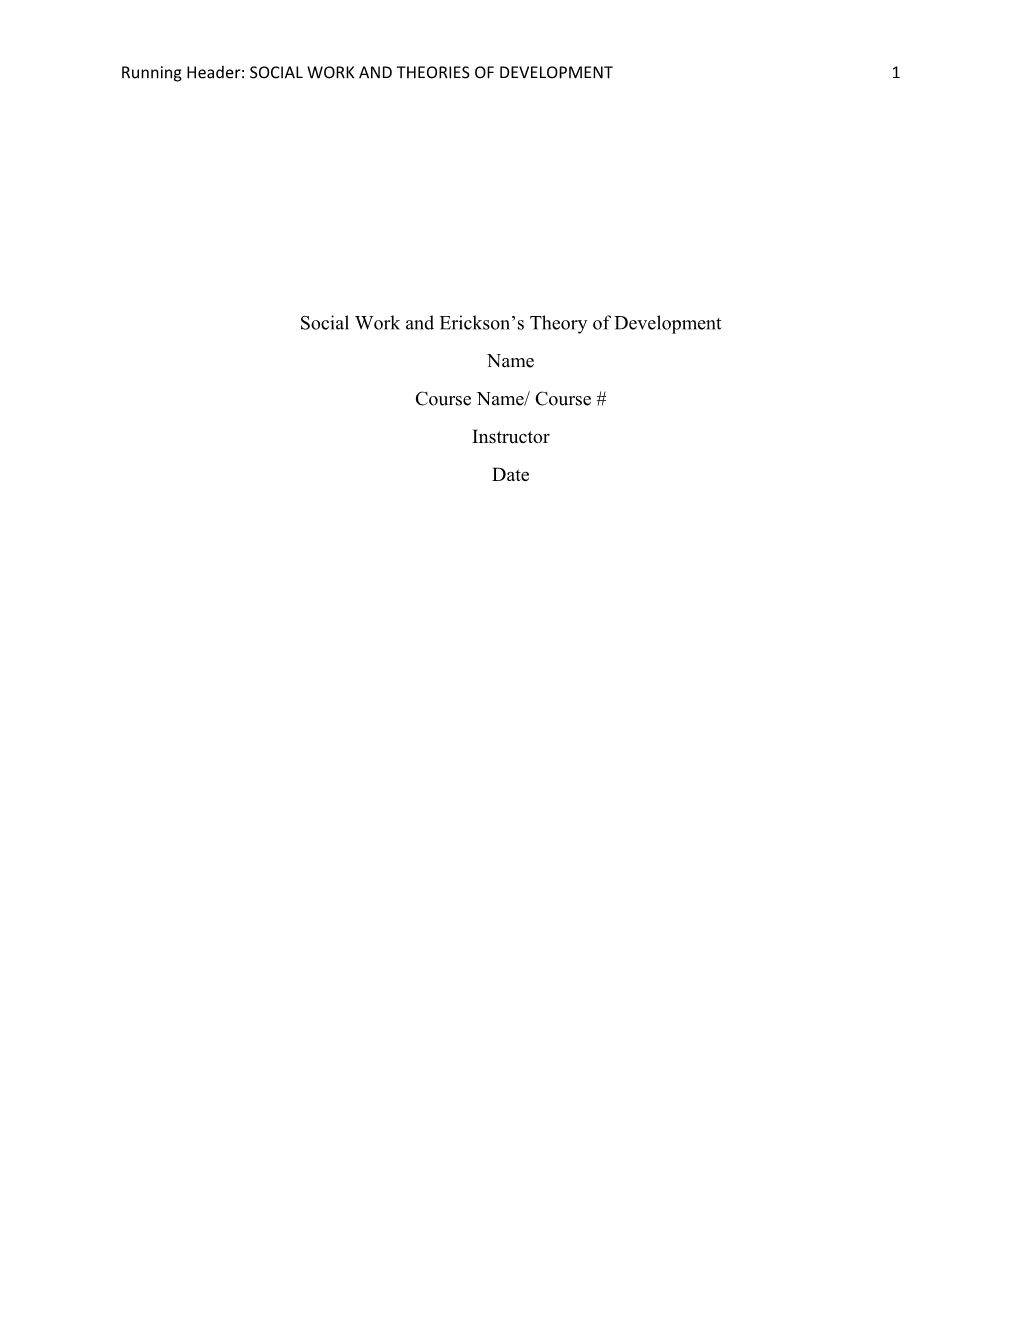 Social Work and Theories of Development2